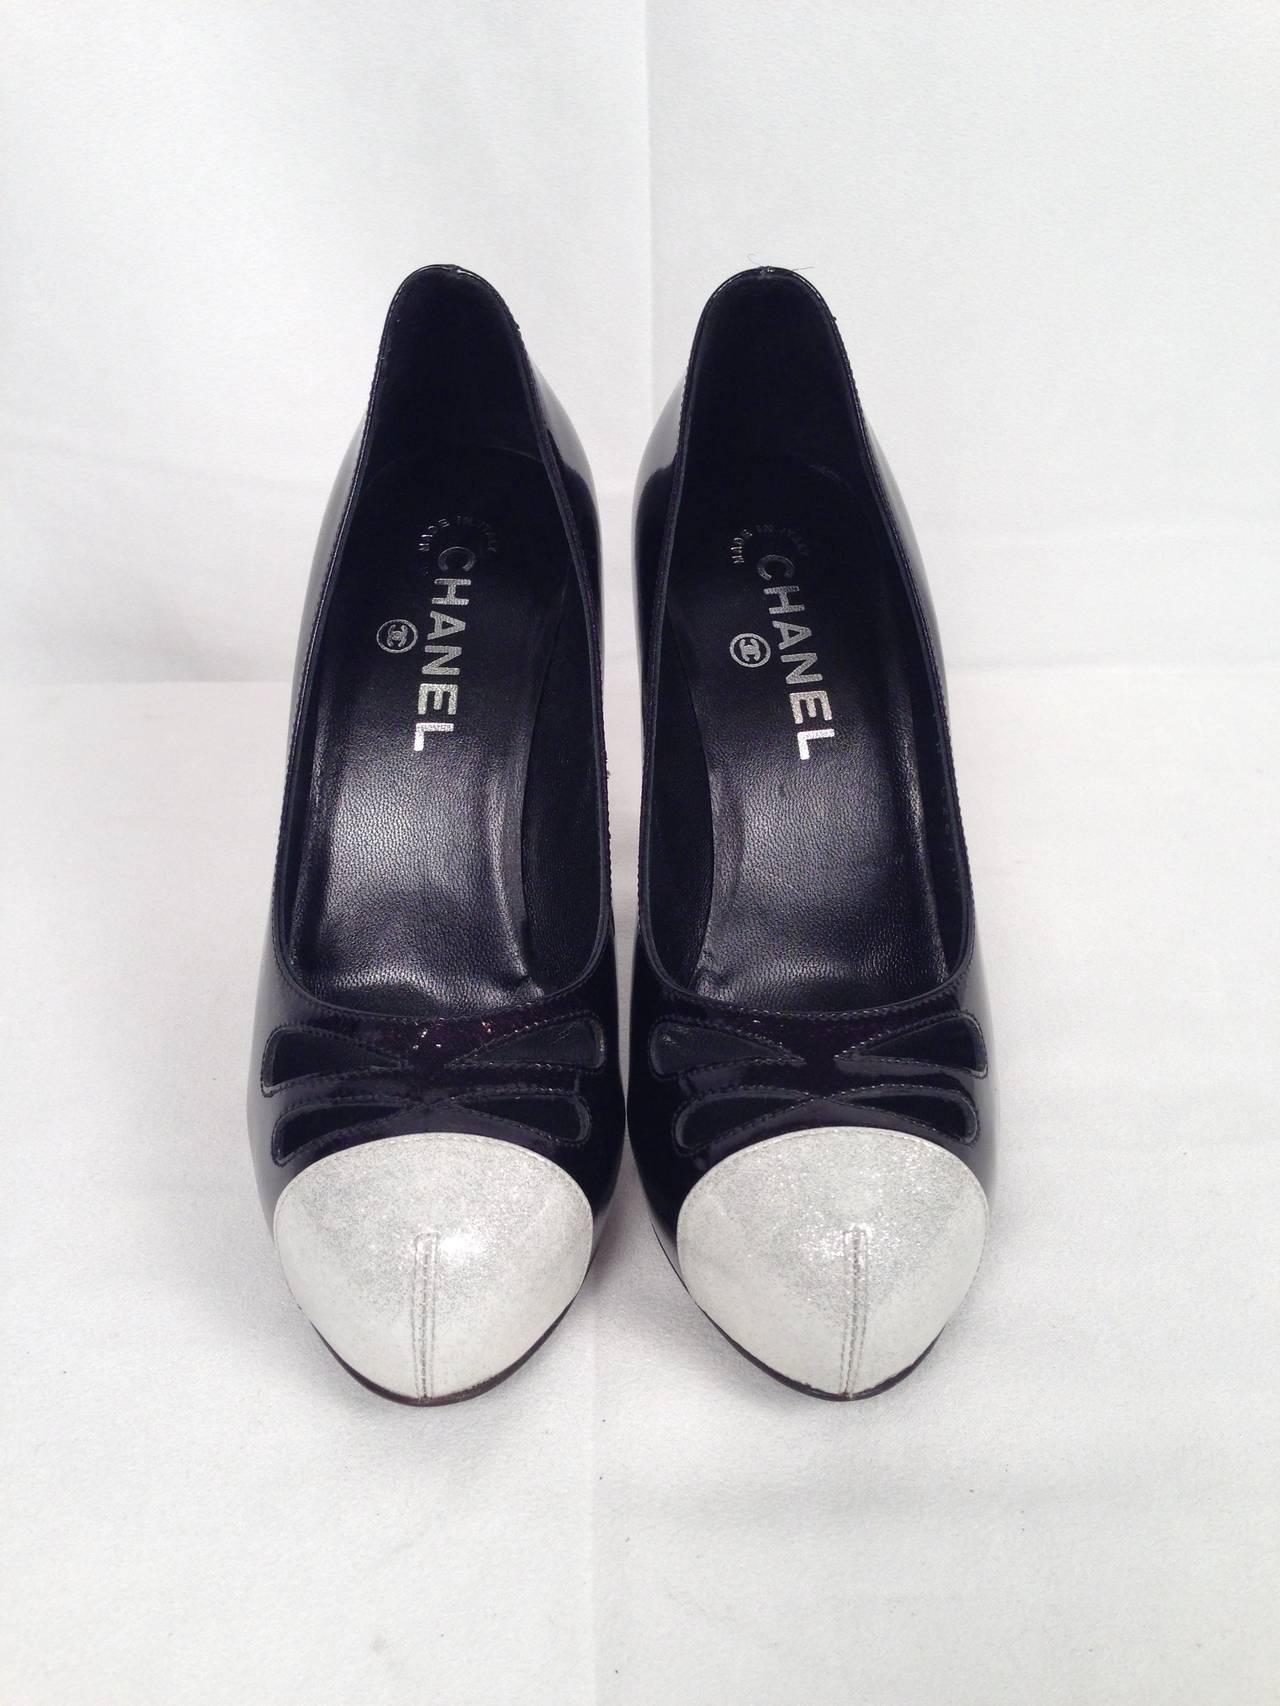 Women's Brand New Chanel Black Patent Leather Iridescent Covered Platform Pumps For Sale